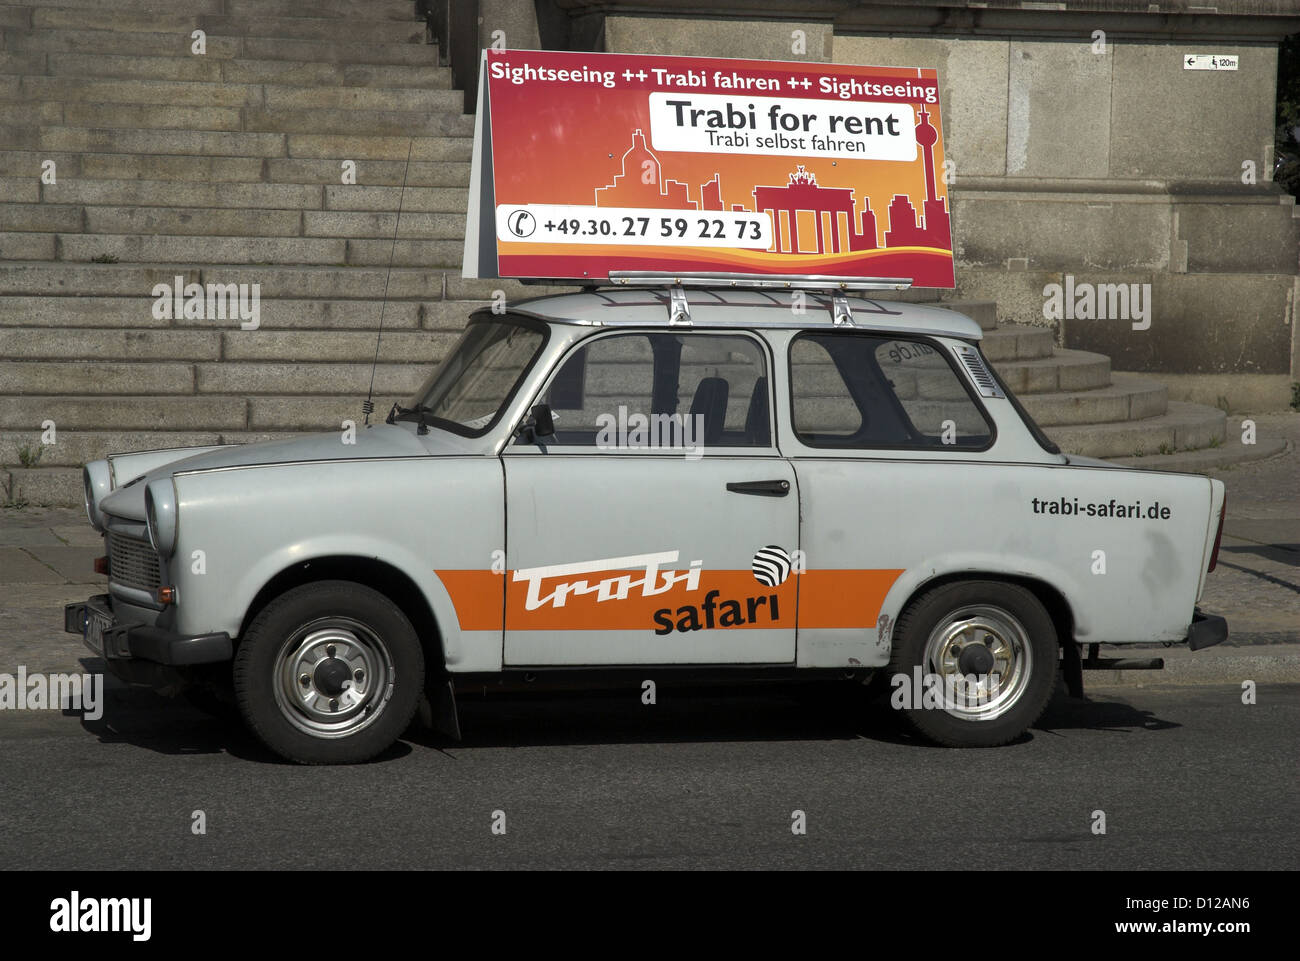 Trabant Car for Sightseeing Berlin Germany Stock Photo